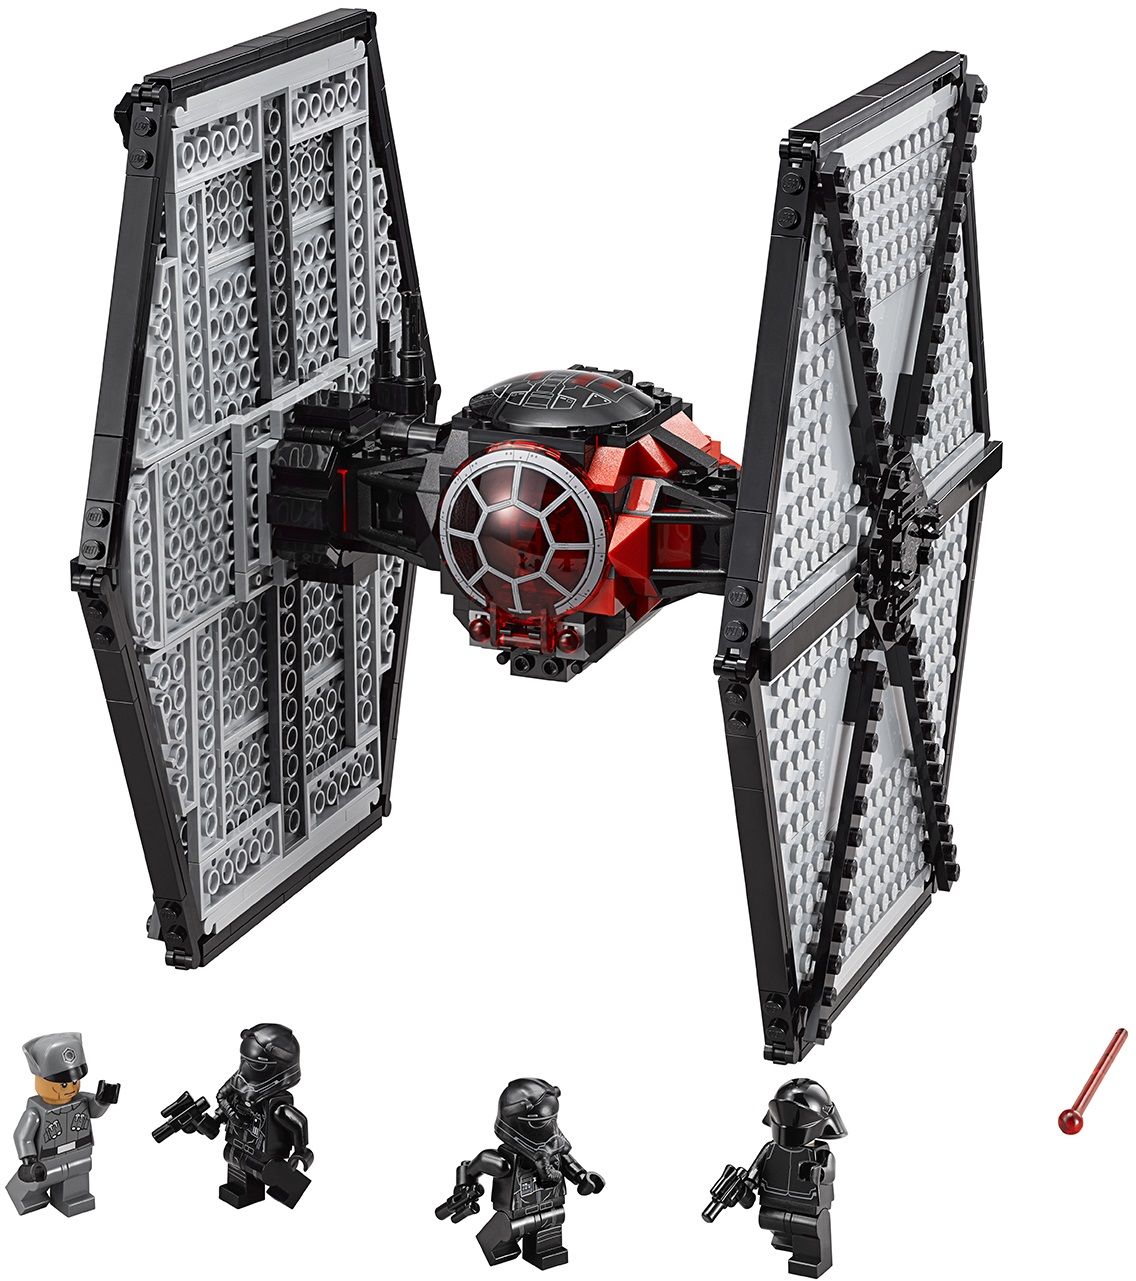 http://geekculture.co/wp-content/uploads/2015/08/Lego-Star-Wars-75101-First-Order-Special-Forces-Tie-Fighter-Minifigures.jpg